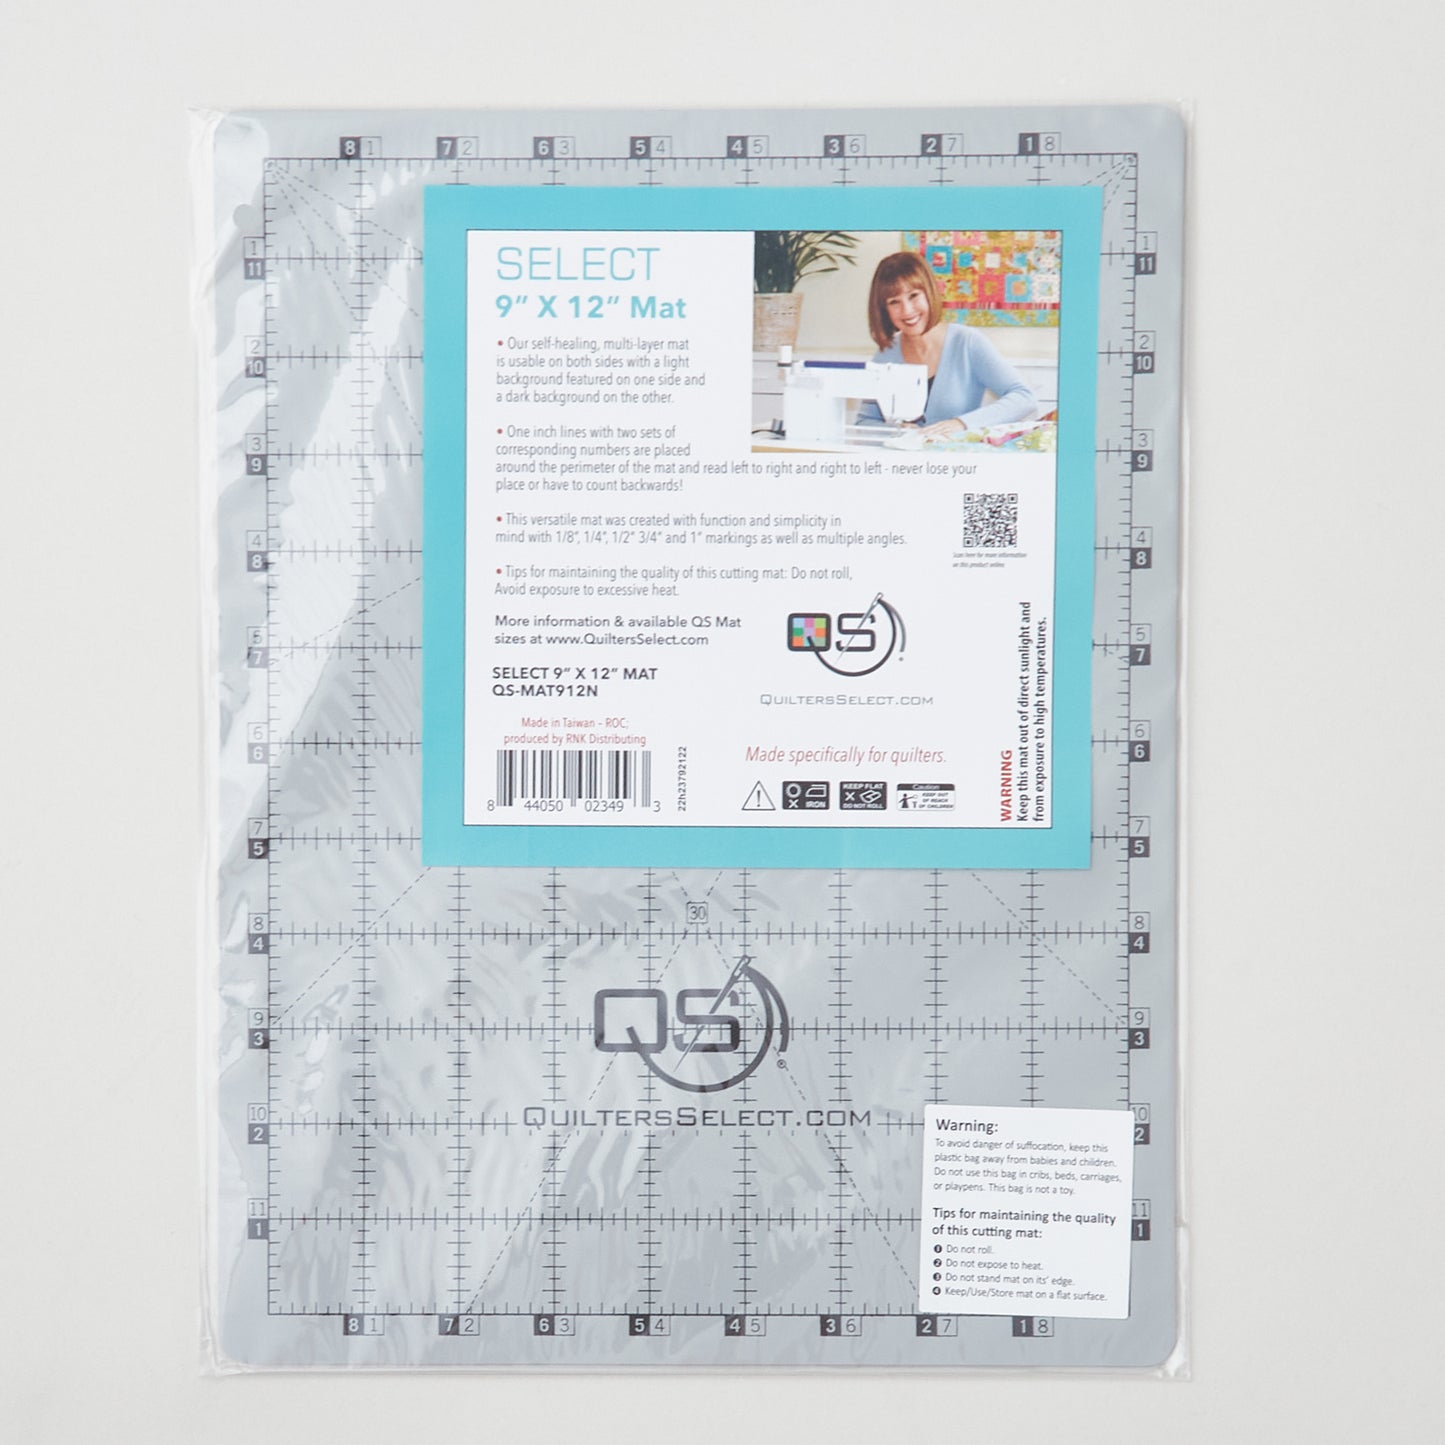 Quilters Select Dual Side Cutting Mat - 9" x 12" Alternative View #2